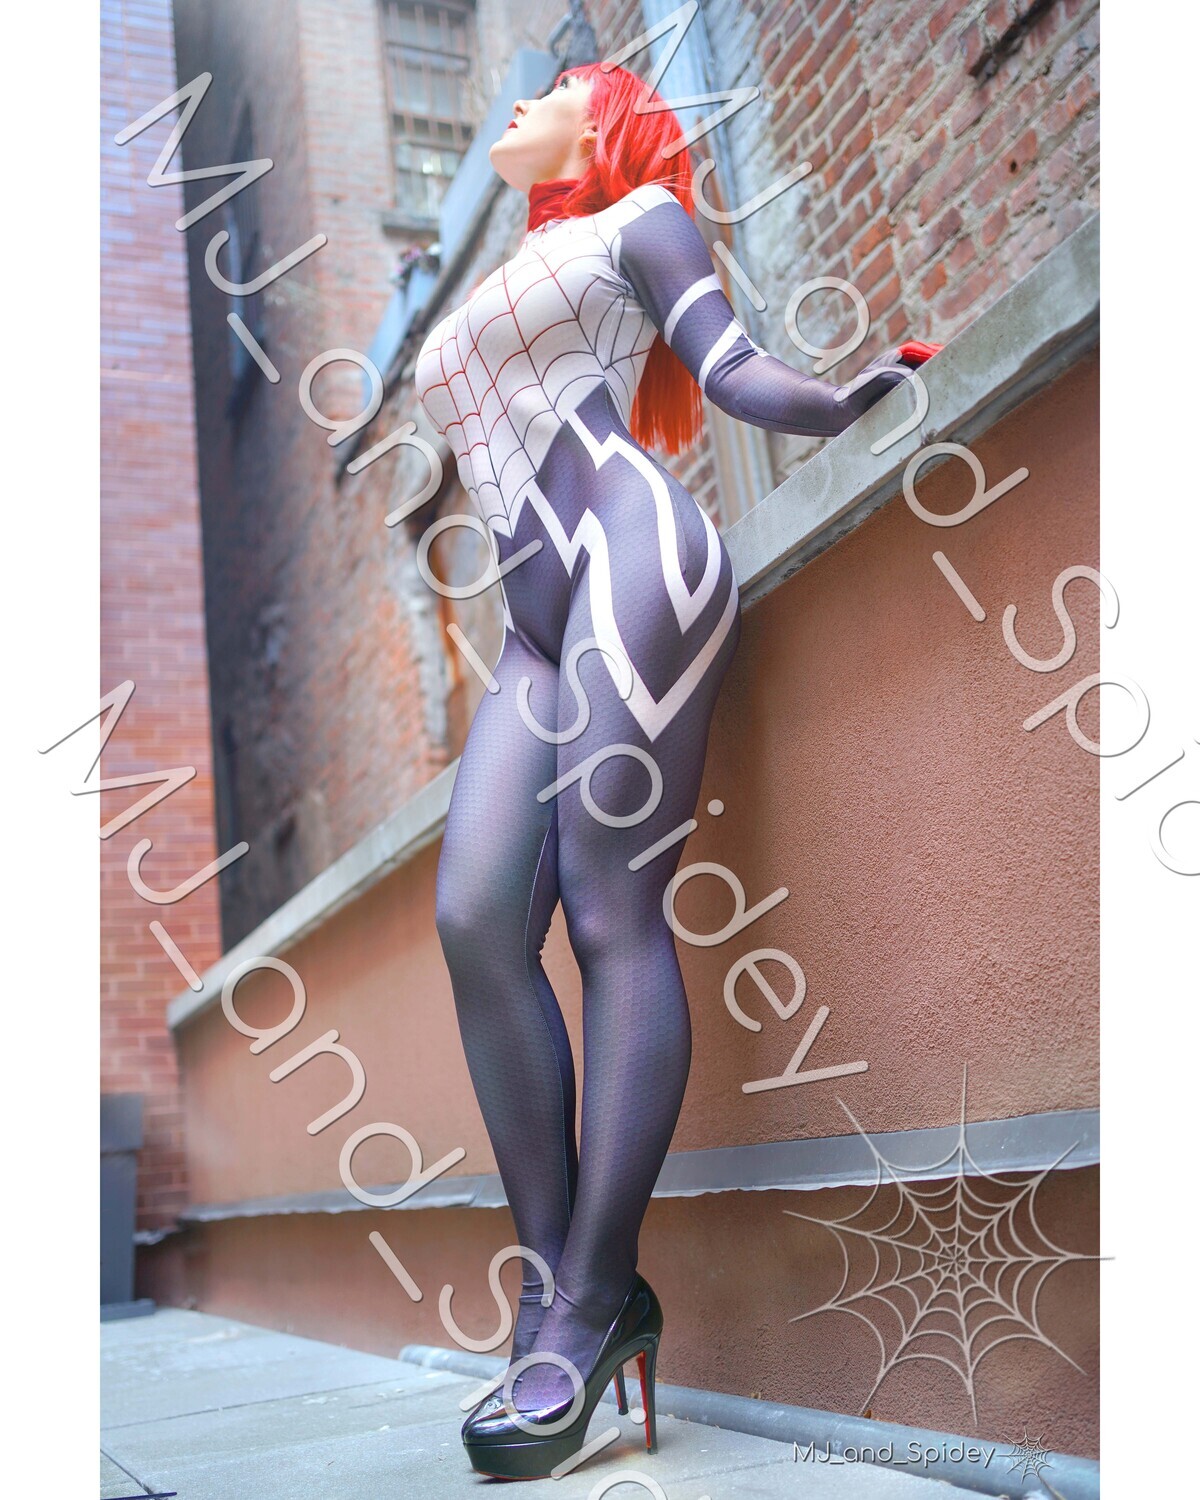 Marvel - Spider-Man - Mary Jane Watson - Silk 5 -  Cosplay Print (@MJ_and_Spidey, MJ and Spidey, Comics)